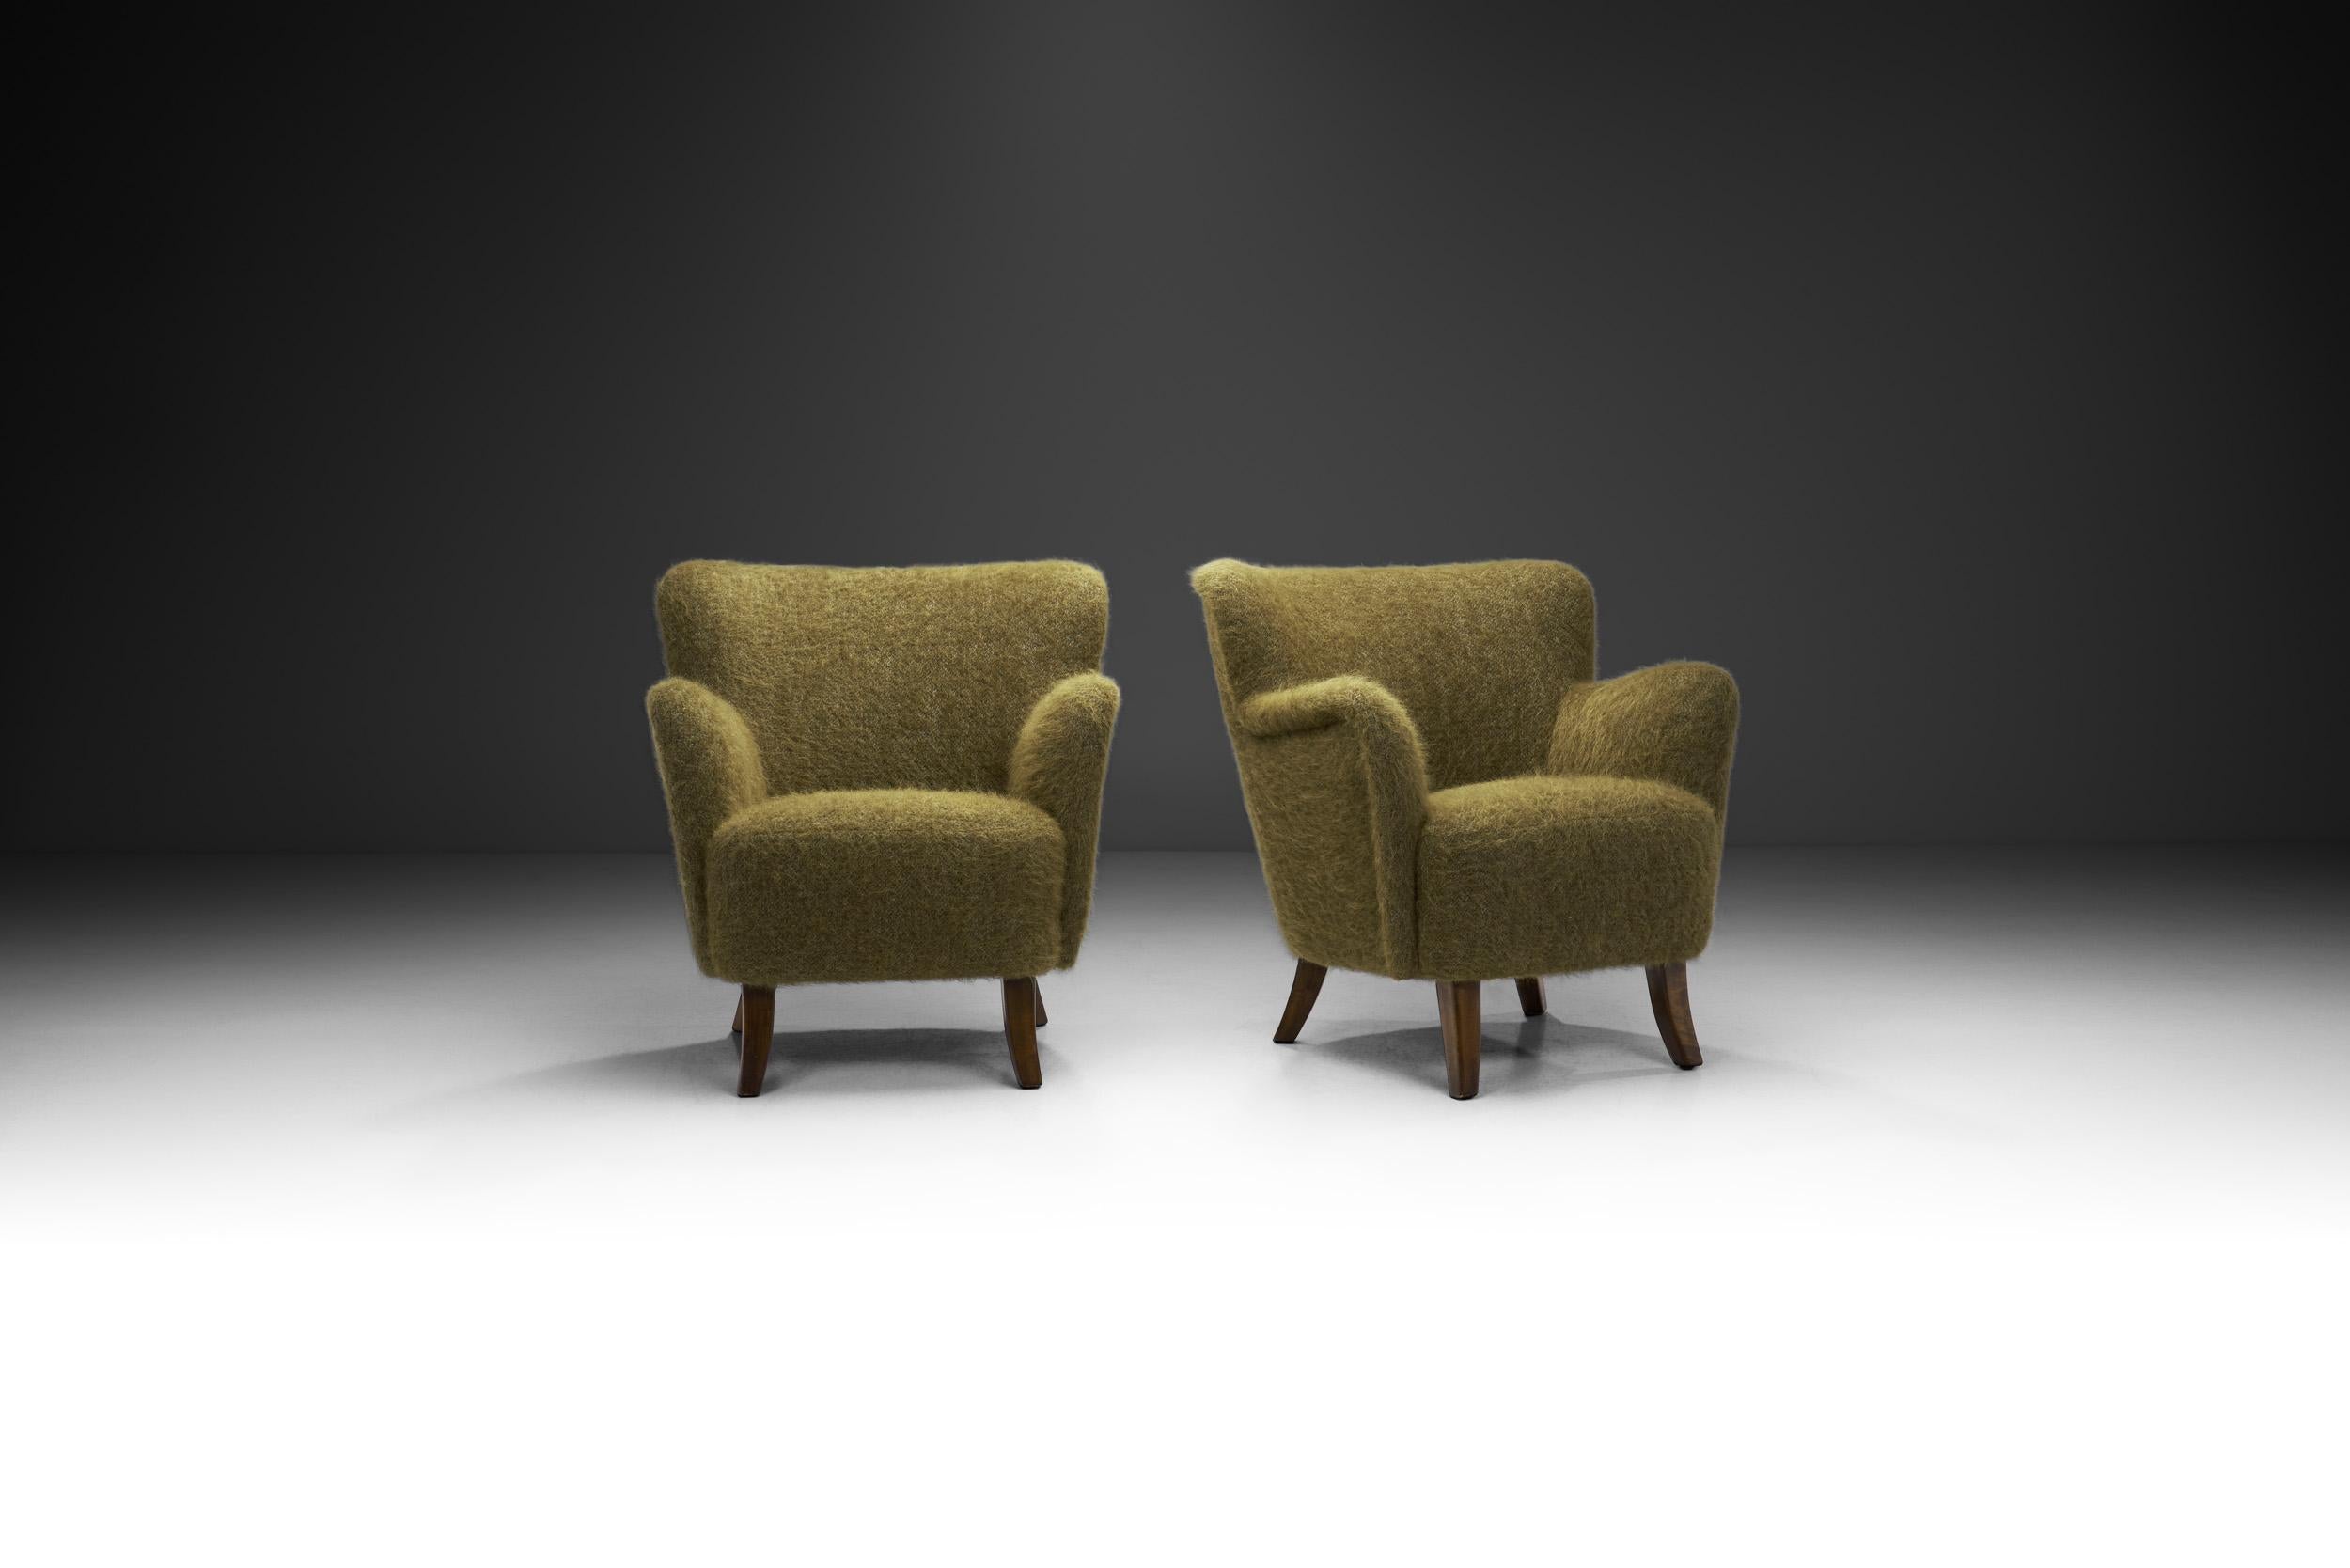 This pair of Scandinavian armchairs is characterized by the best qualities of the region’s mid-century design. From the restrained aesthetic to the elegant pairing of materials, these chairs are the perfect examples of how pairing Scandinavian